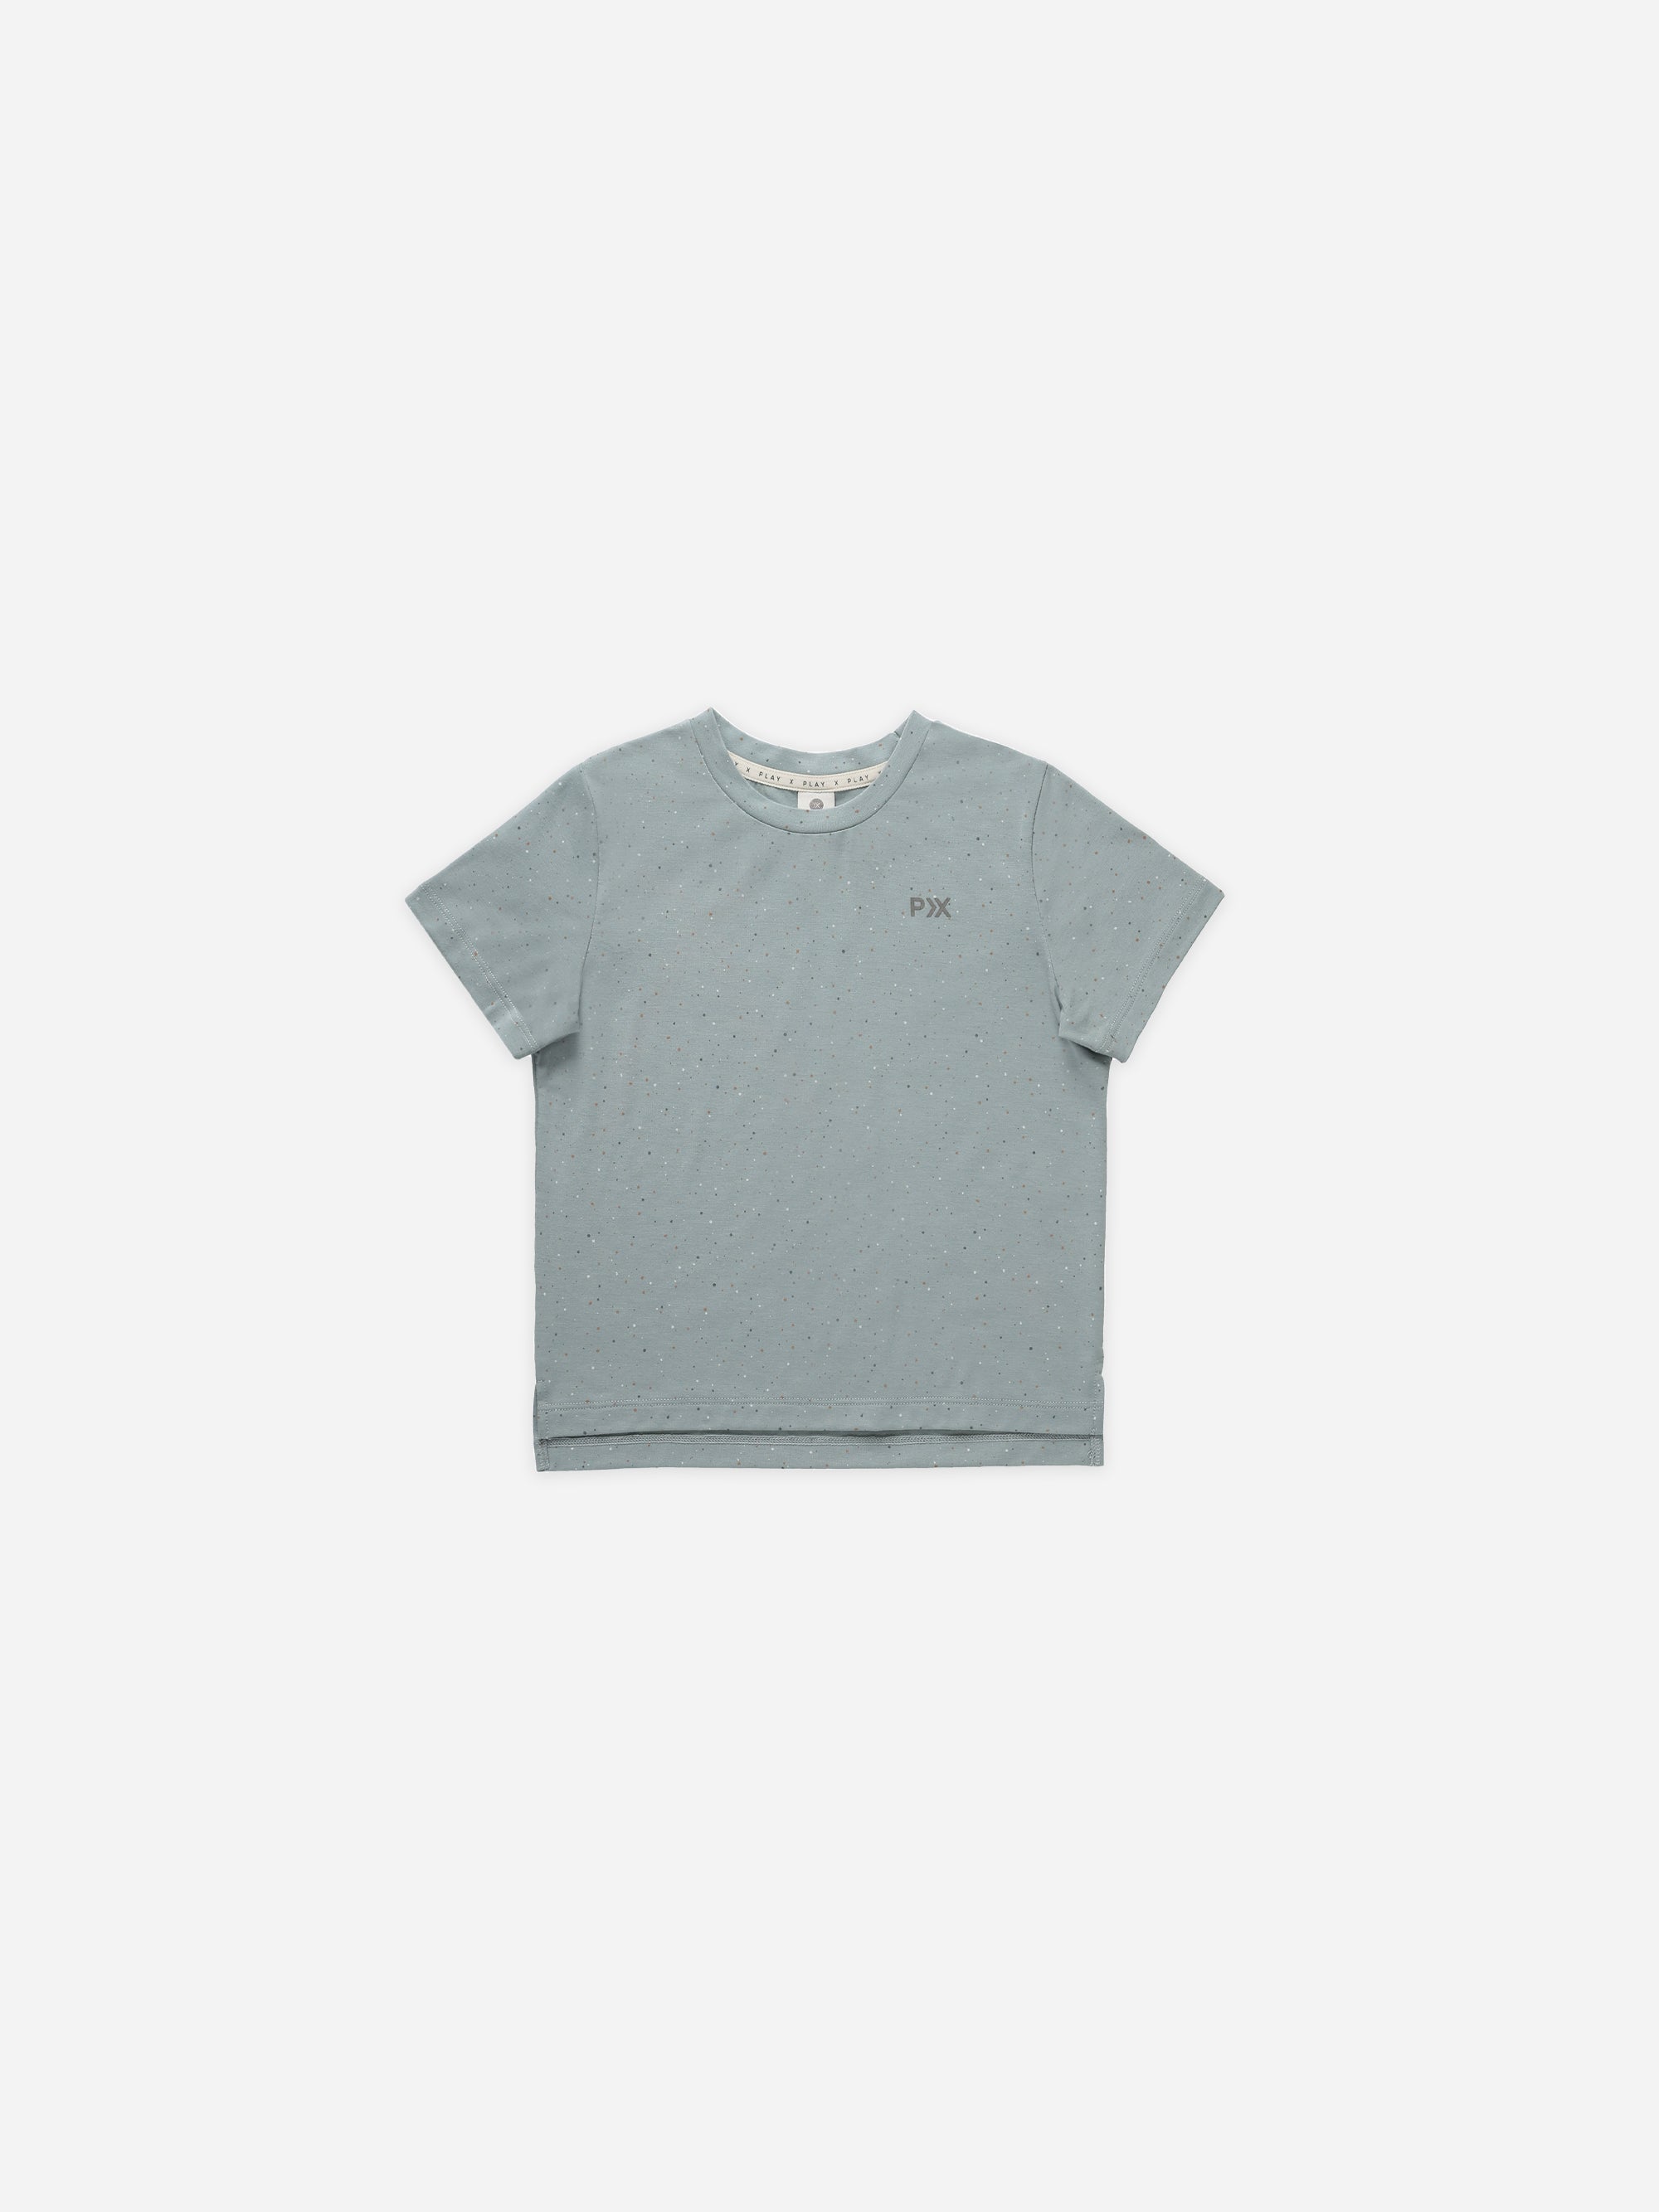 Cove Essential Tee || Blue Speckle - Rylee + Cru | Kids Clothes | Trendy Baby Clothes | Modern Infant Outfits |